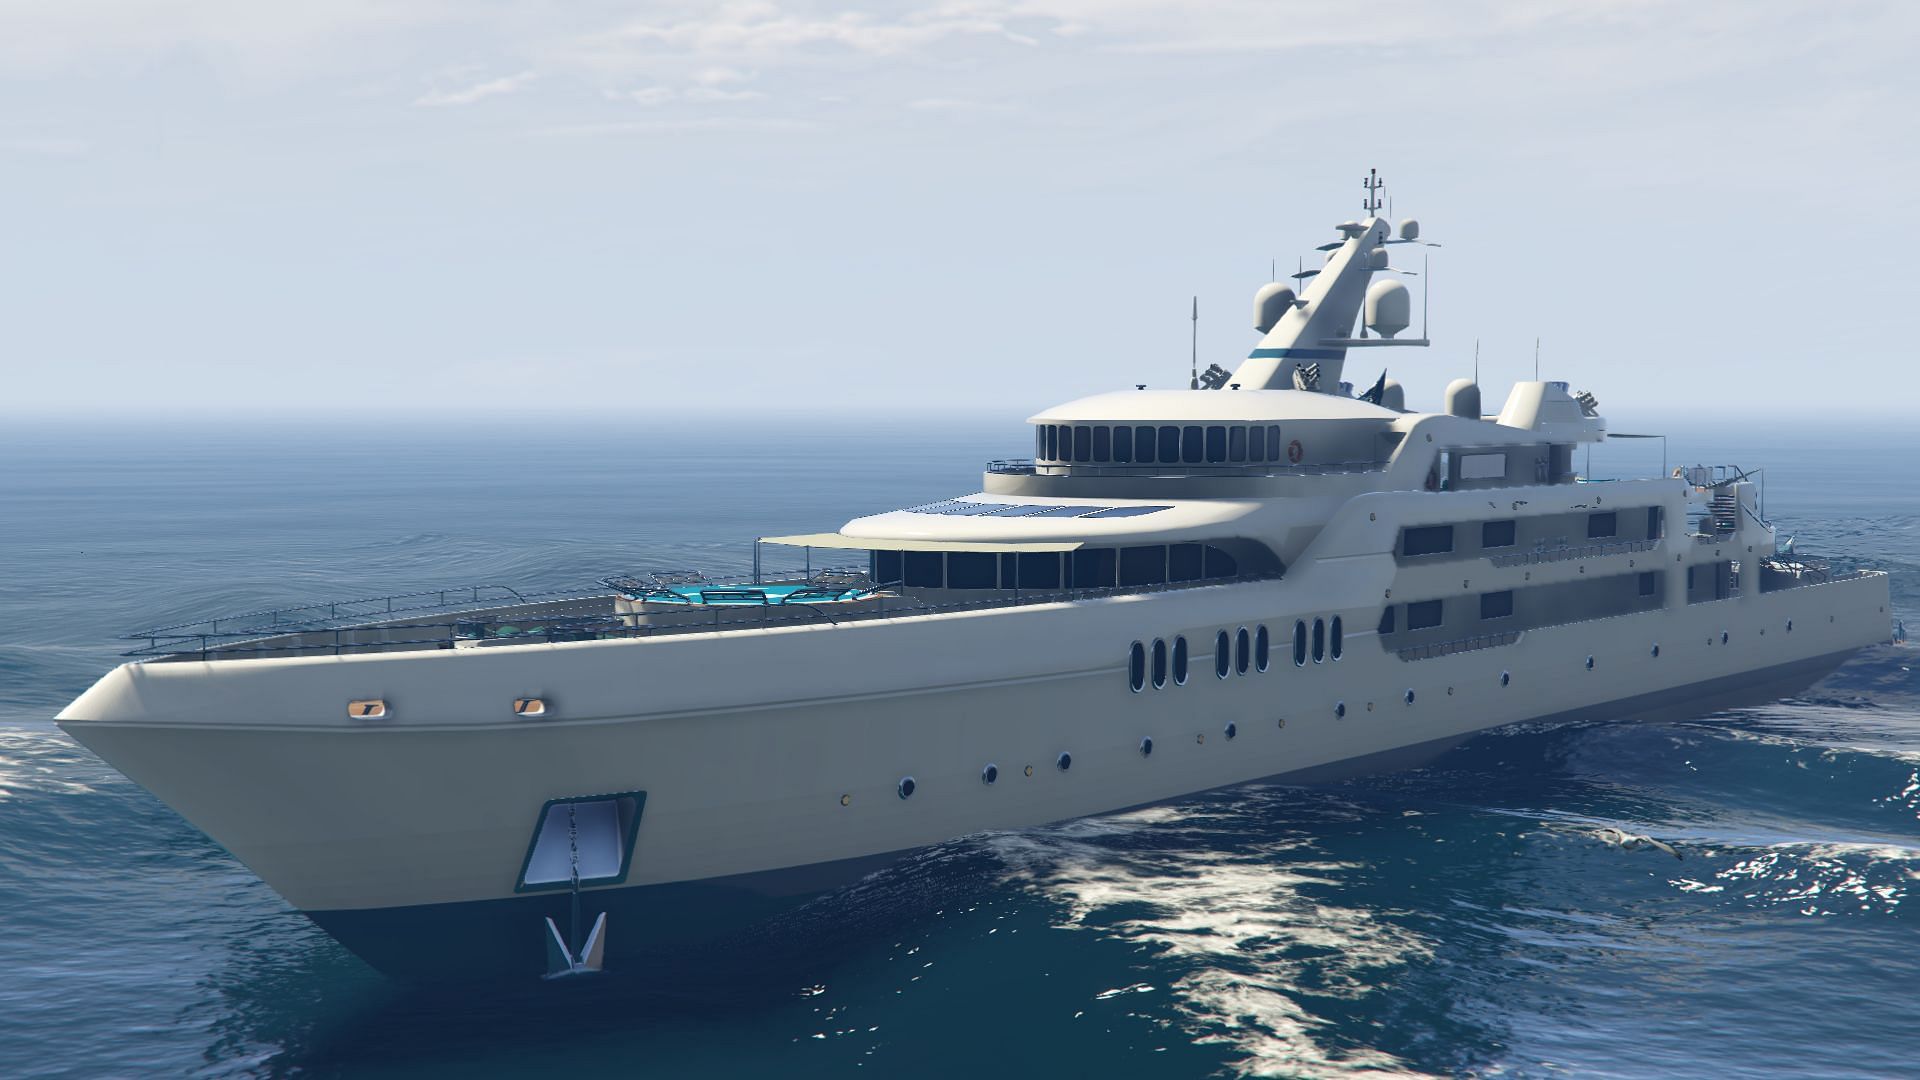 Any of the three Yacht models will work for this exploit